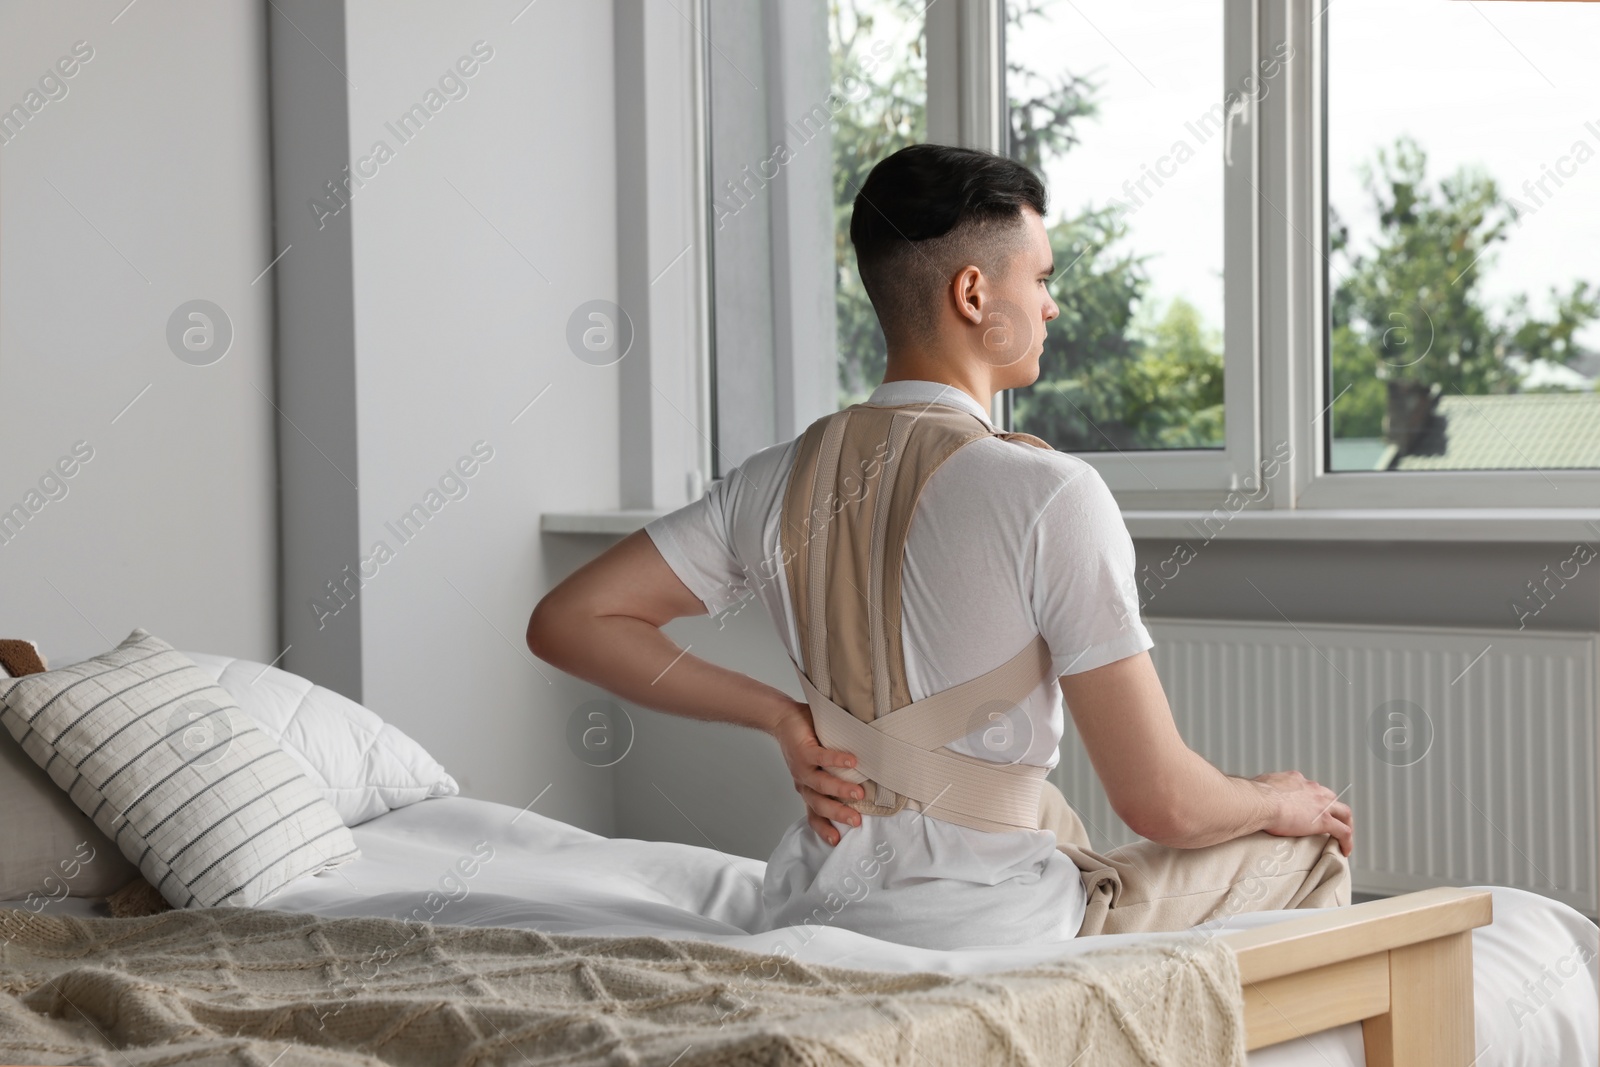 Photo of Man with orthopedic corset sitting in bedroom